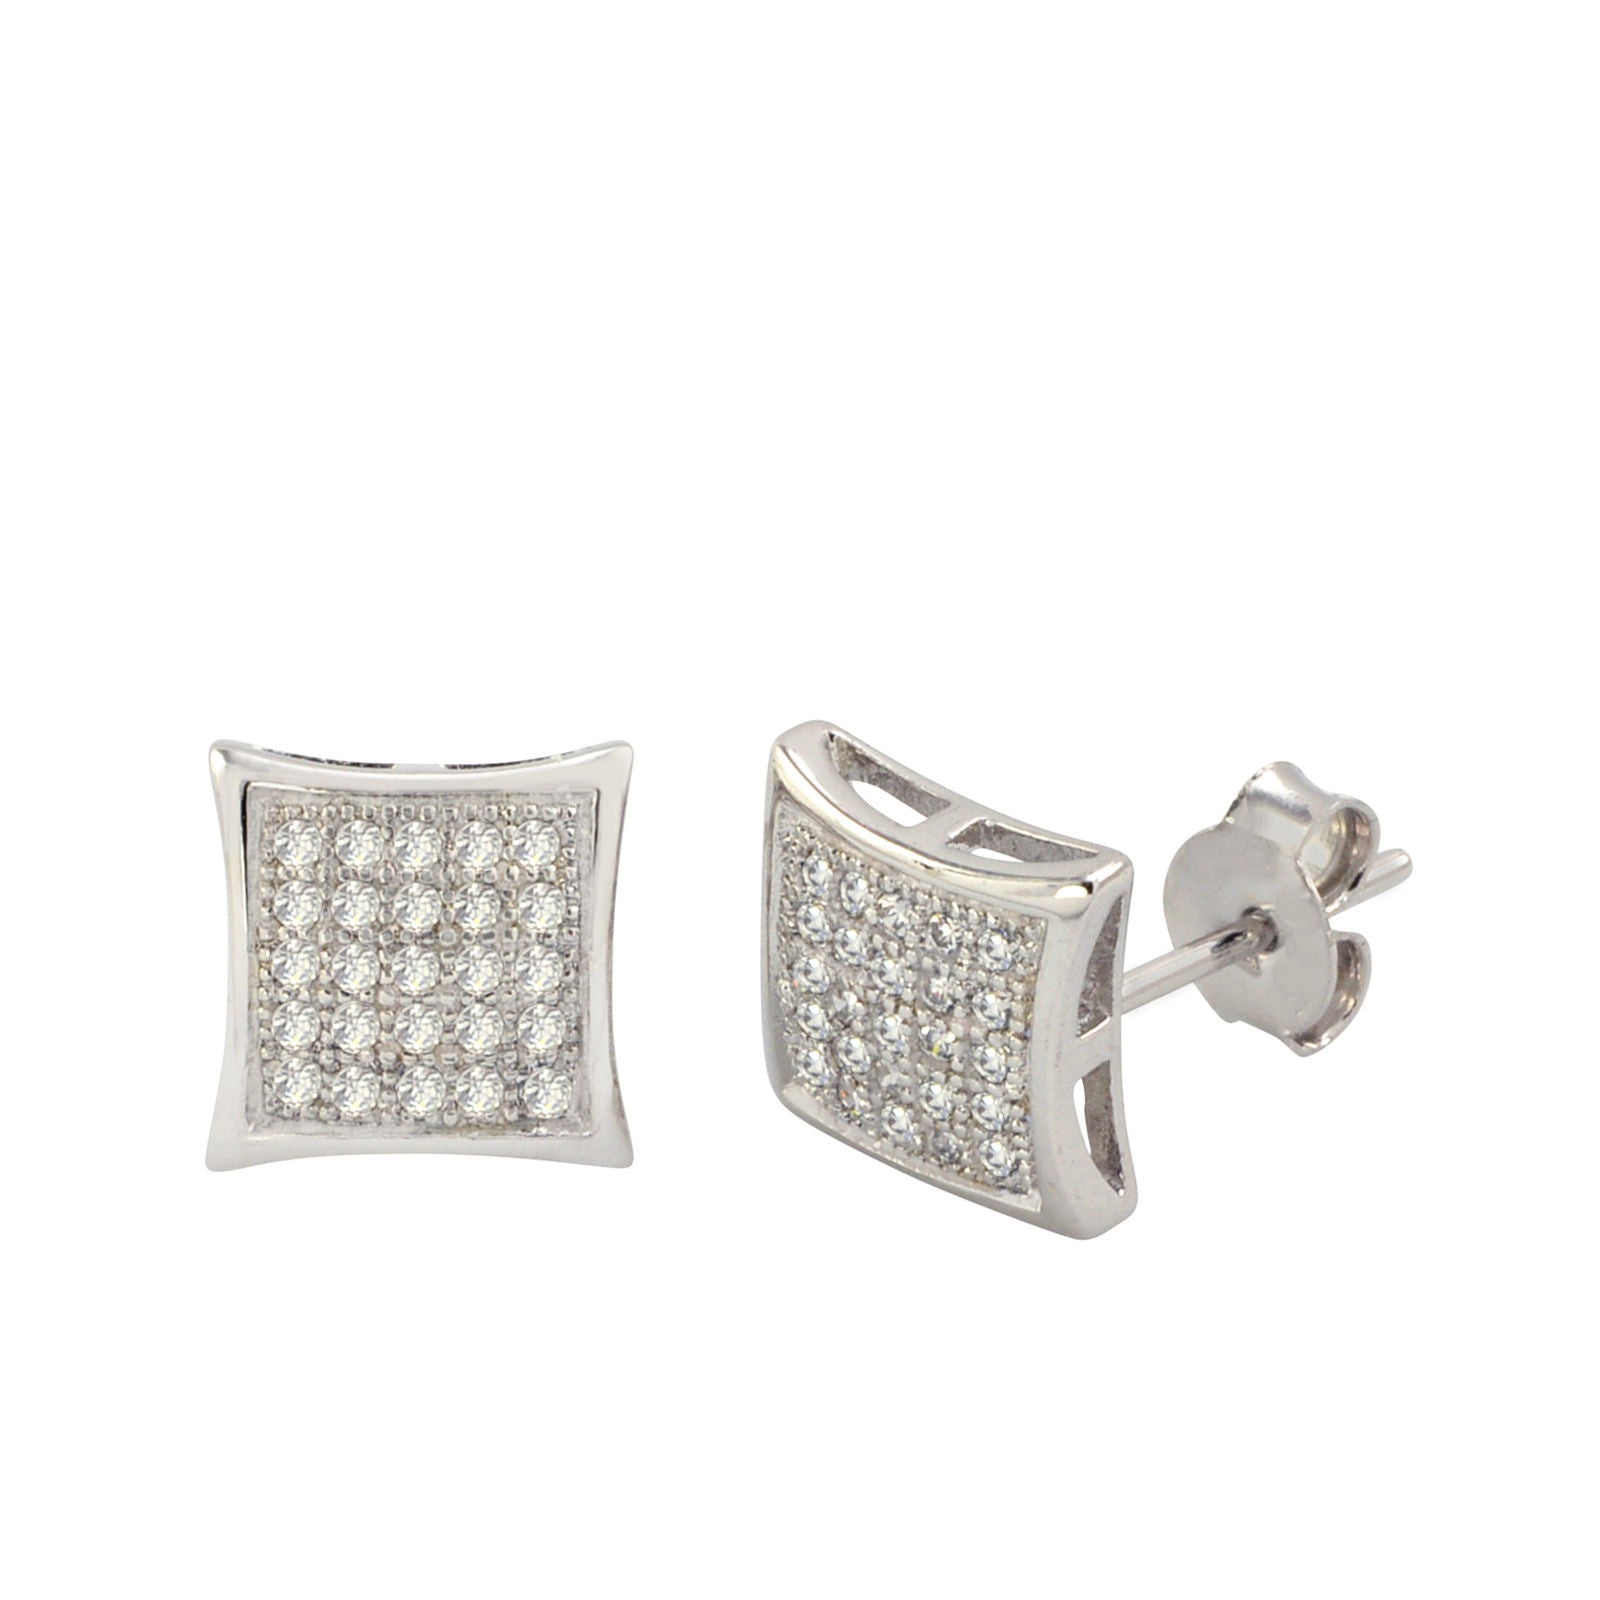 Tiny Nautical Beach Pave CZ Starfish Stud Earrings .925 Sterling Silver 